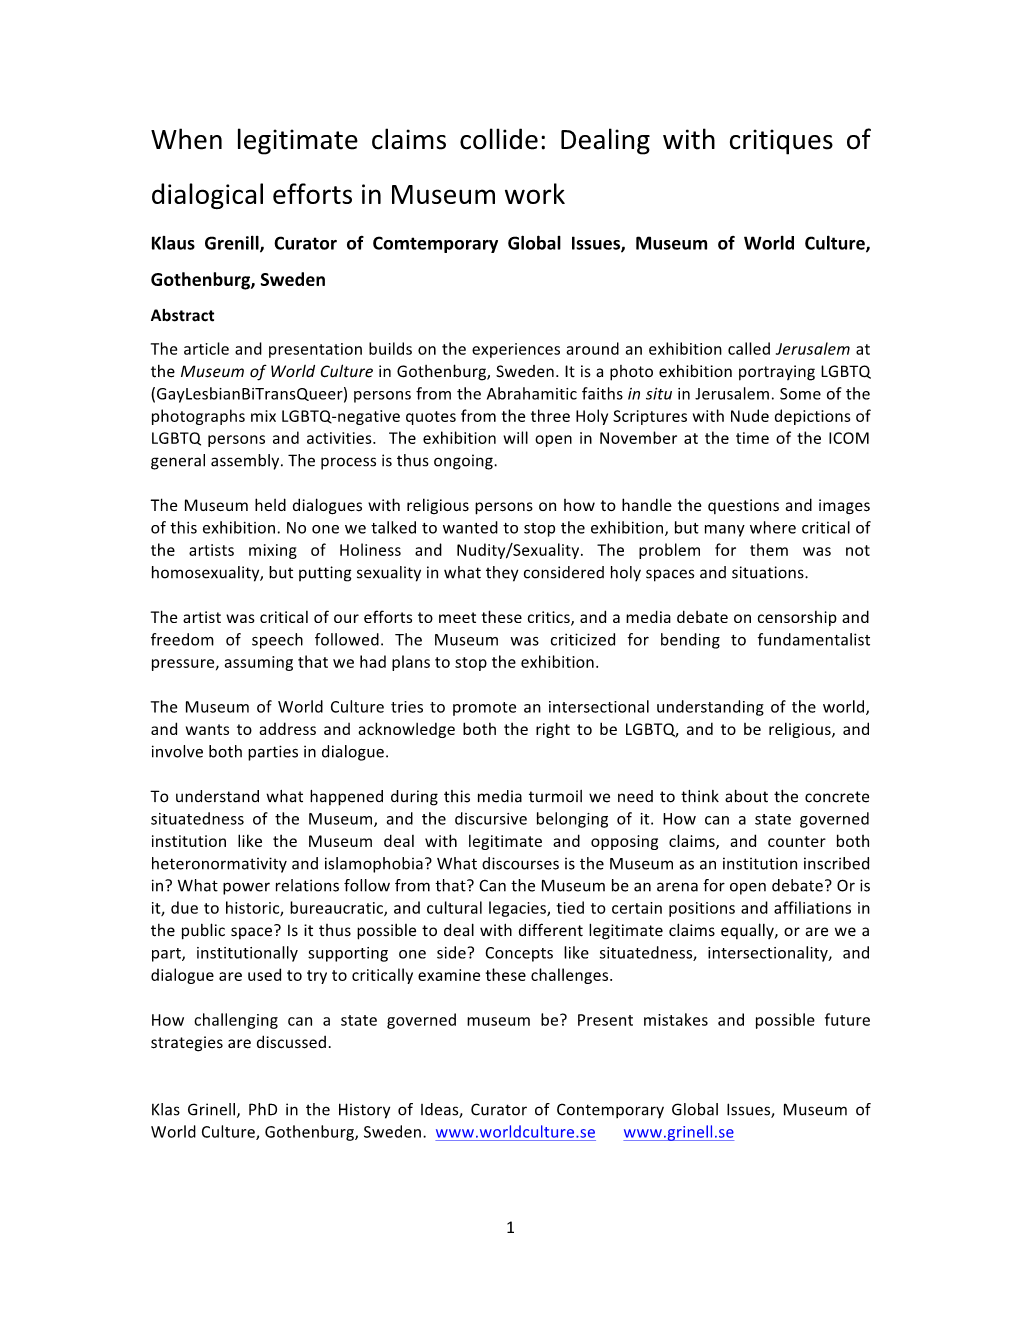 When Legitimate Claims Collide: Dealing with Critiques of Dialogical Efforts in Museum Work